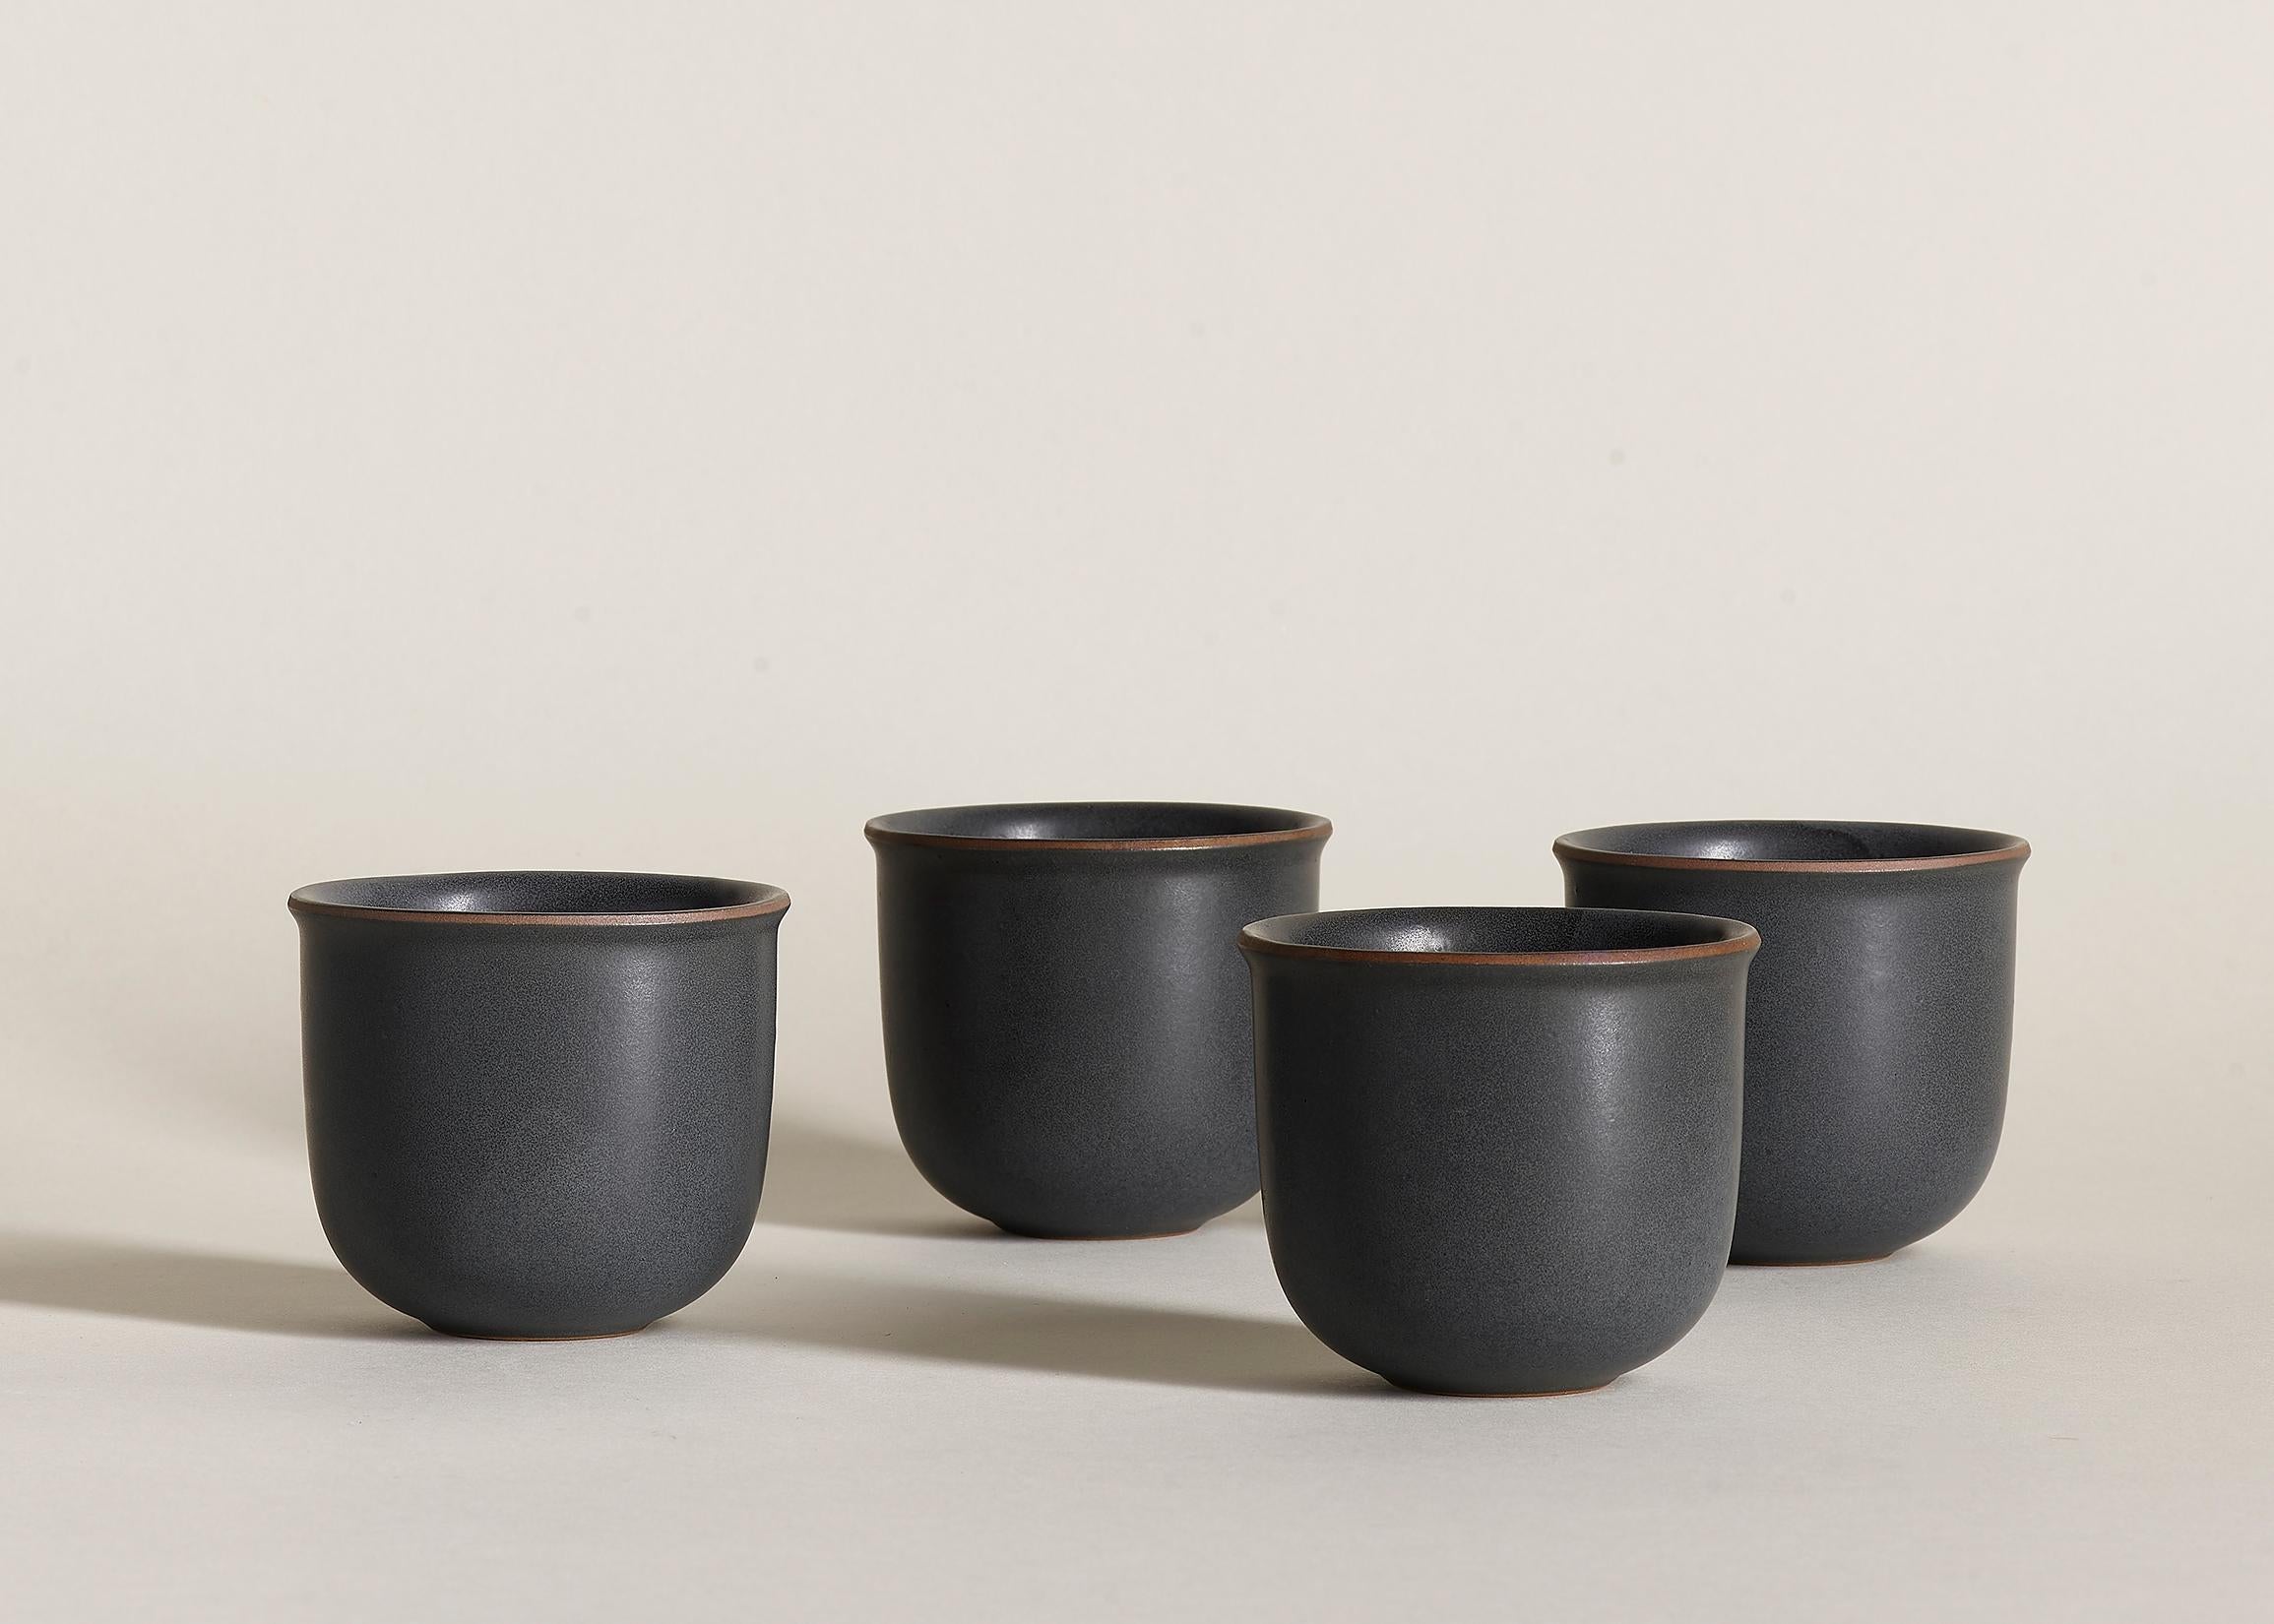 Brave Matter studio’s first accessories collection is characterized by brave silhouettes and evocative material finishes. Uniting ceramic with wood they create utilitarian objects that are equally resolute and ethereal, visceral and